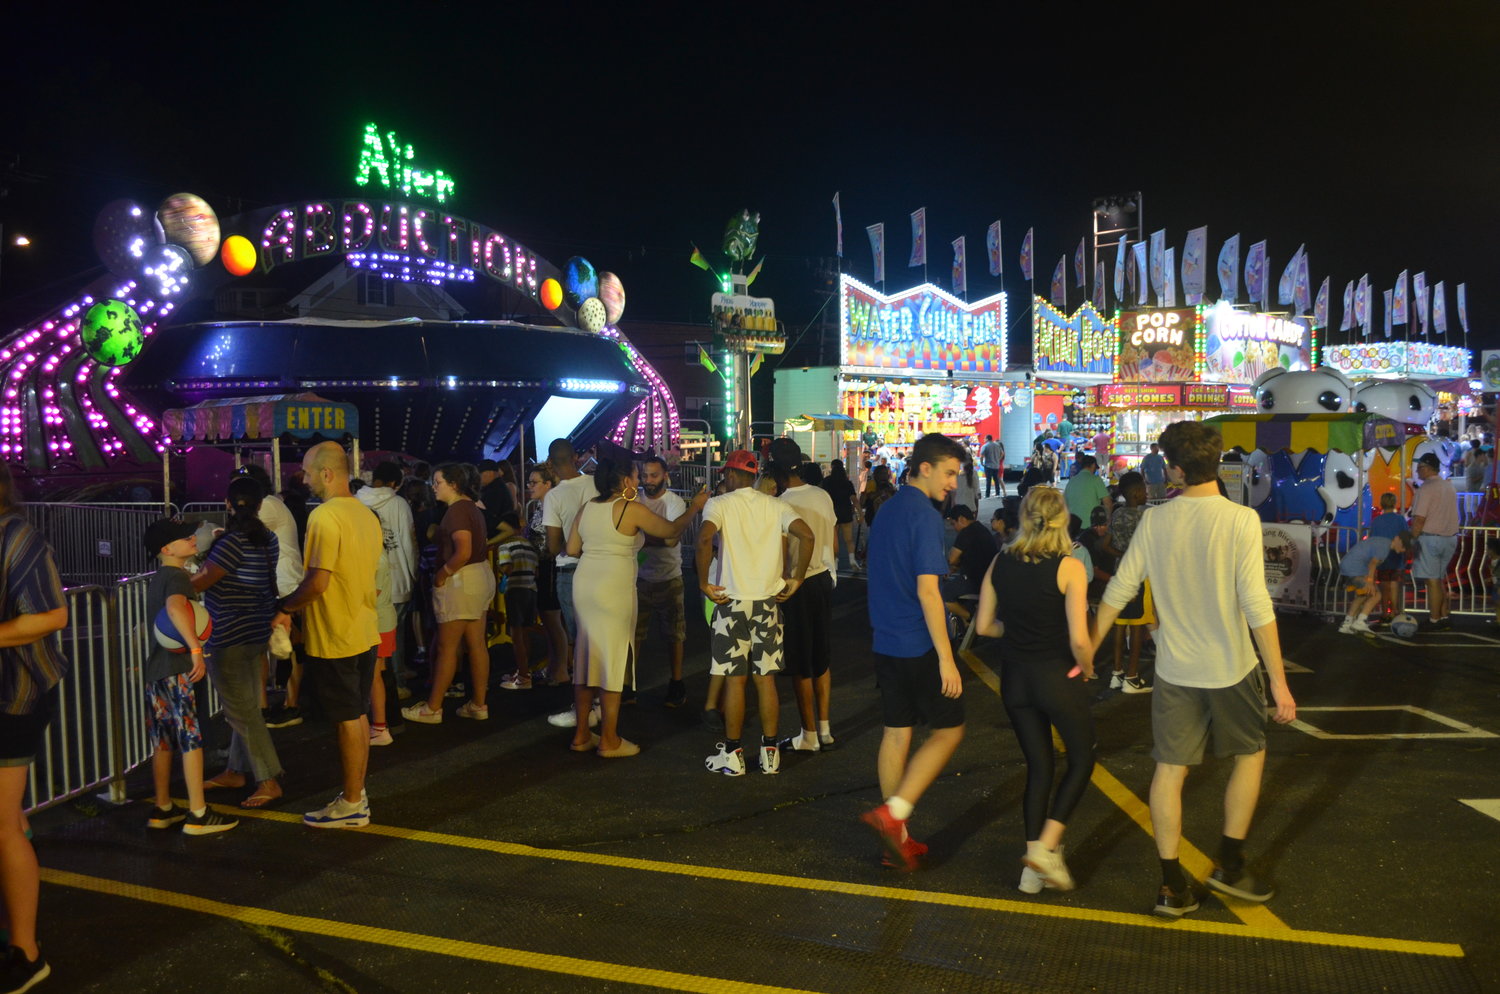 People from all over Long Island came to enjoy the games and rides provided by Newton Shows and the St. Agnes Parish.